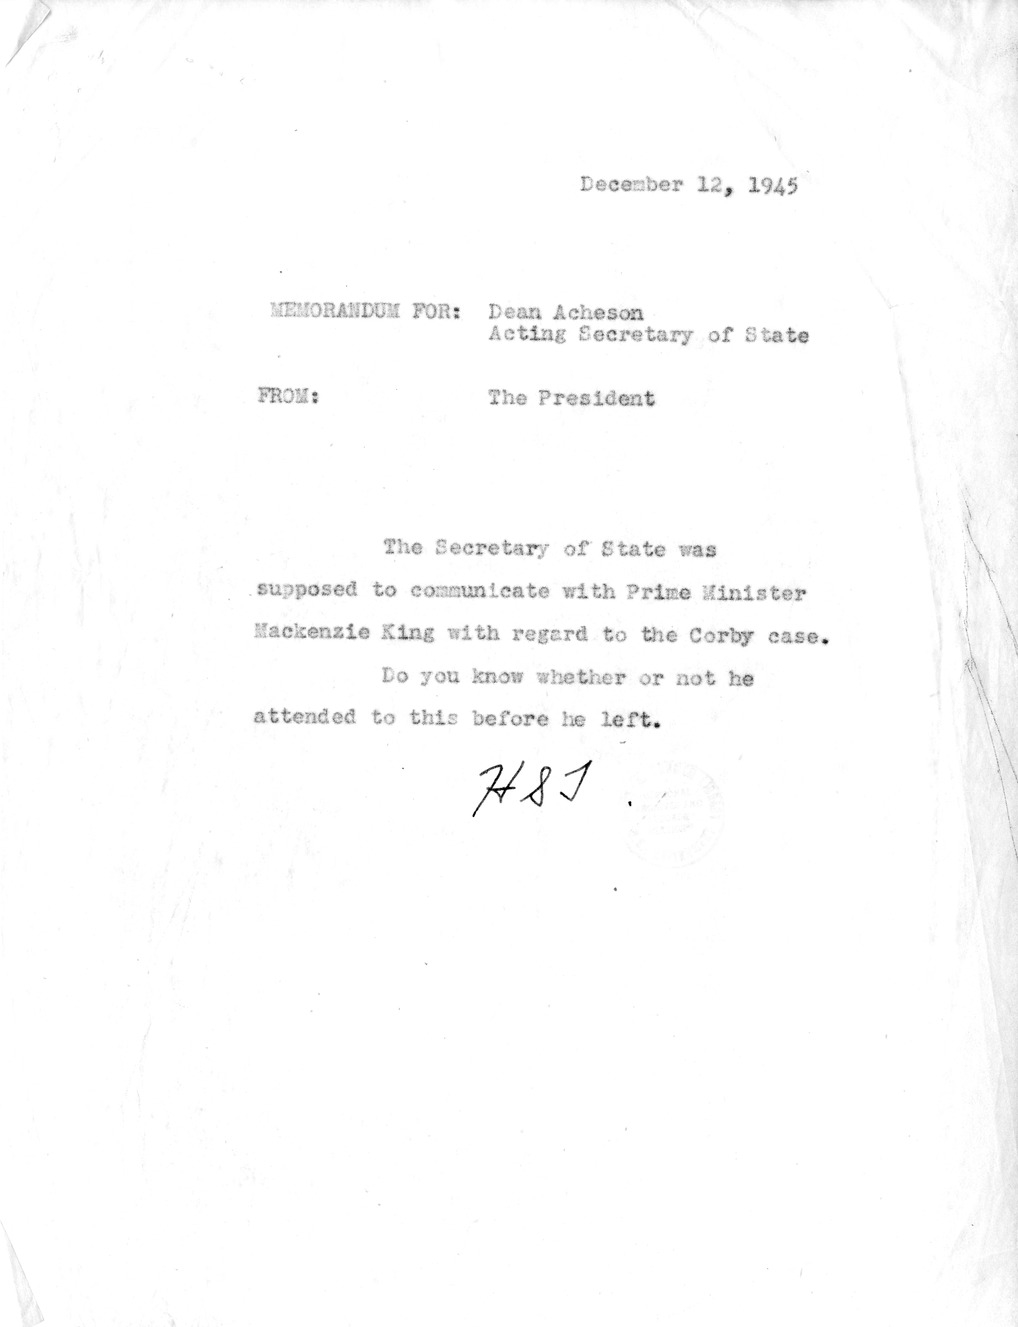 Letter from President Harry S. Truman to Secretary of State James Byrnes with Related Material